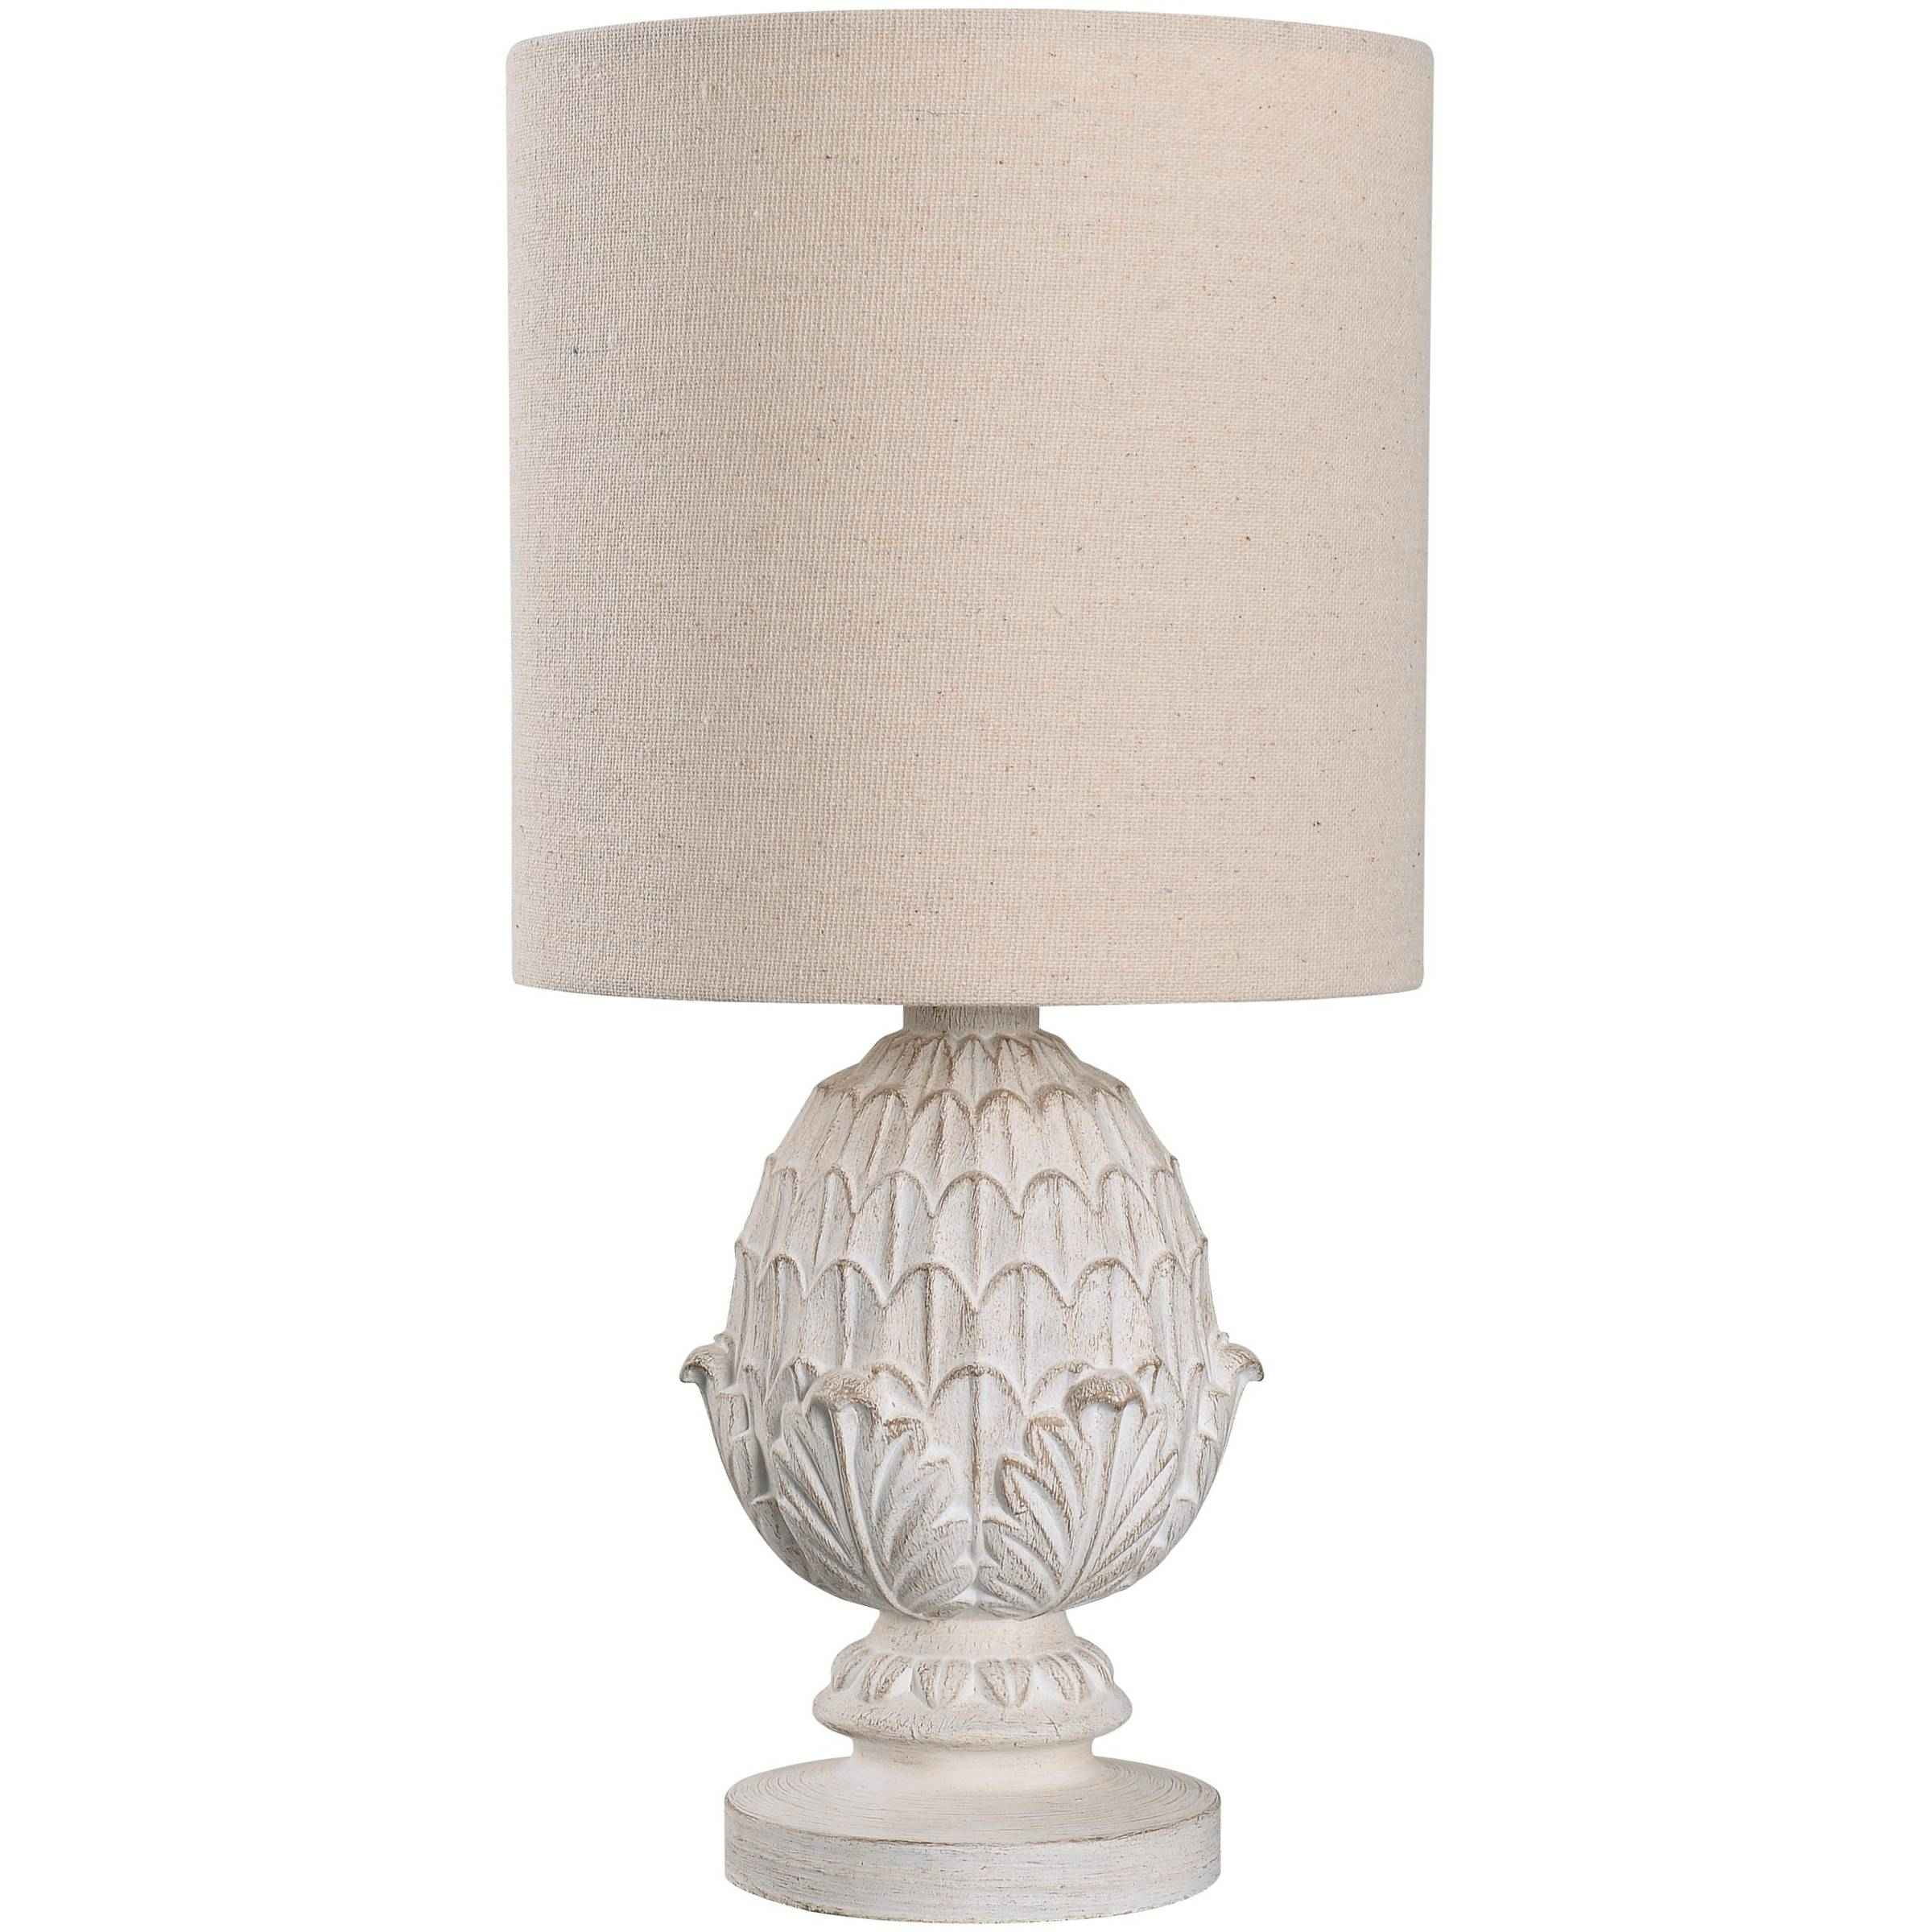 Mainstays Mini Table Lamp with Shade 12.75"H - White Finished Traditional Style